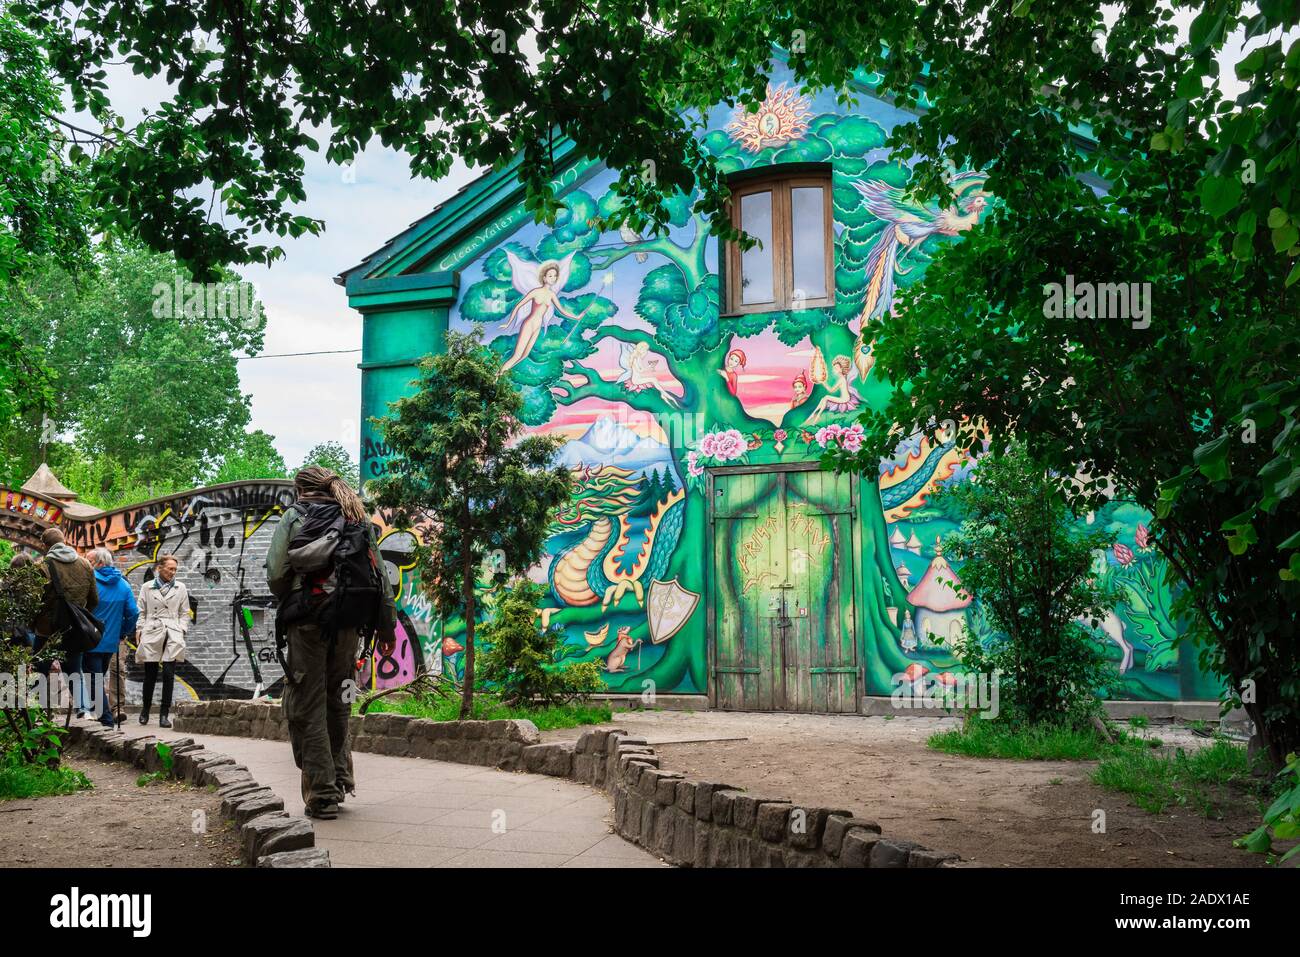 Alternative Denmark, rear view of a man walking past a colorful illustrated house inside the Freetown area of Christiania, Copenhagen, Denmark Stock Photo